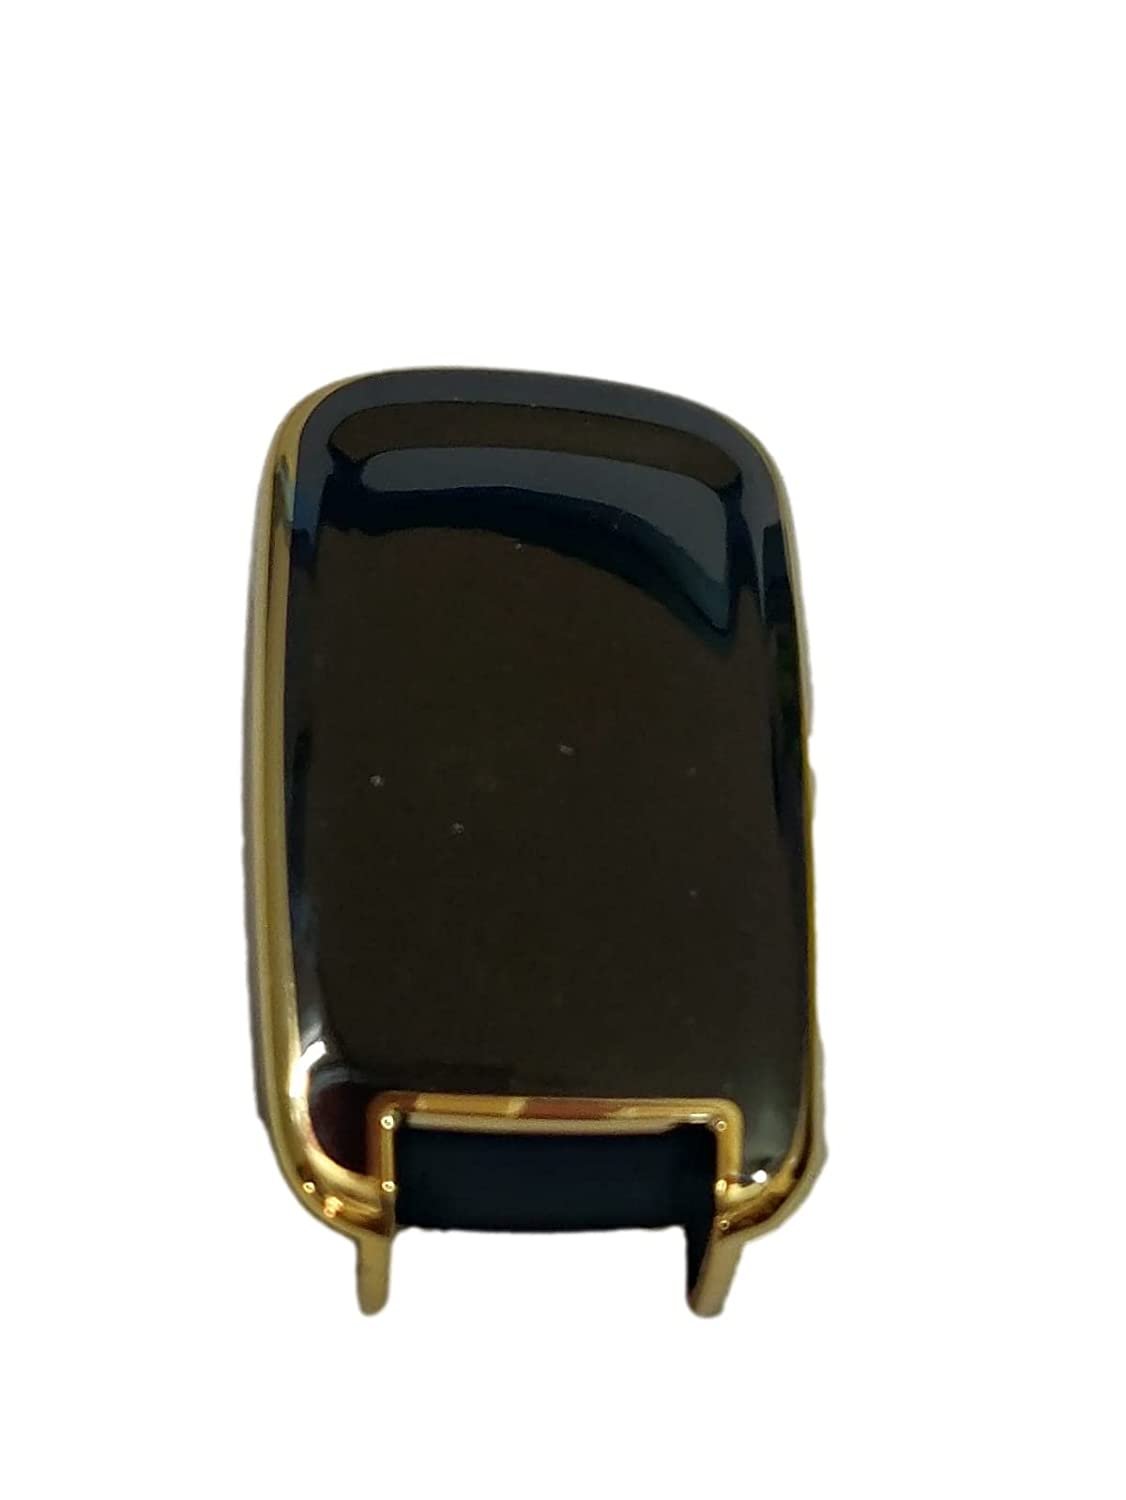 TPU Key Cover Compatible with Chevrolet Cruze (Black/Gold) Image 